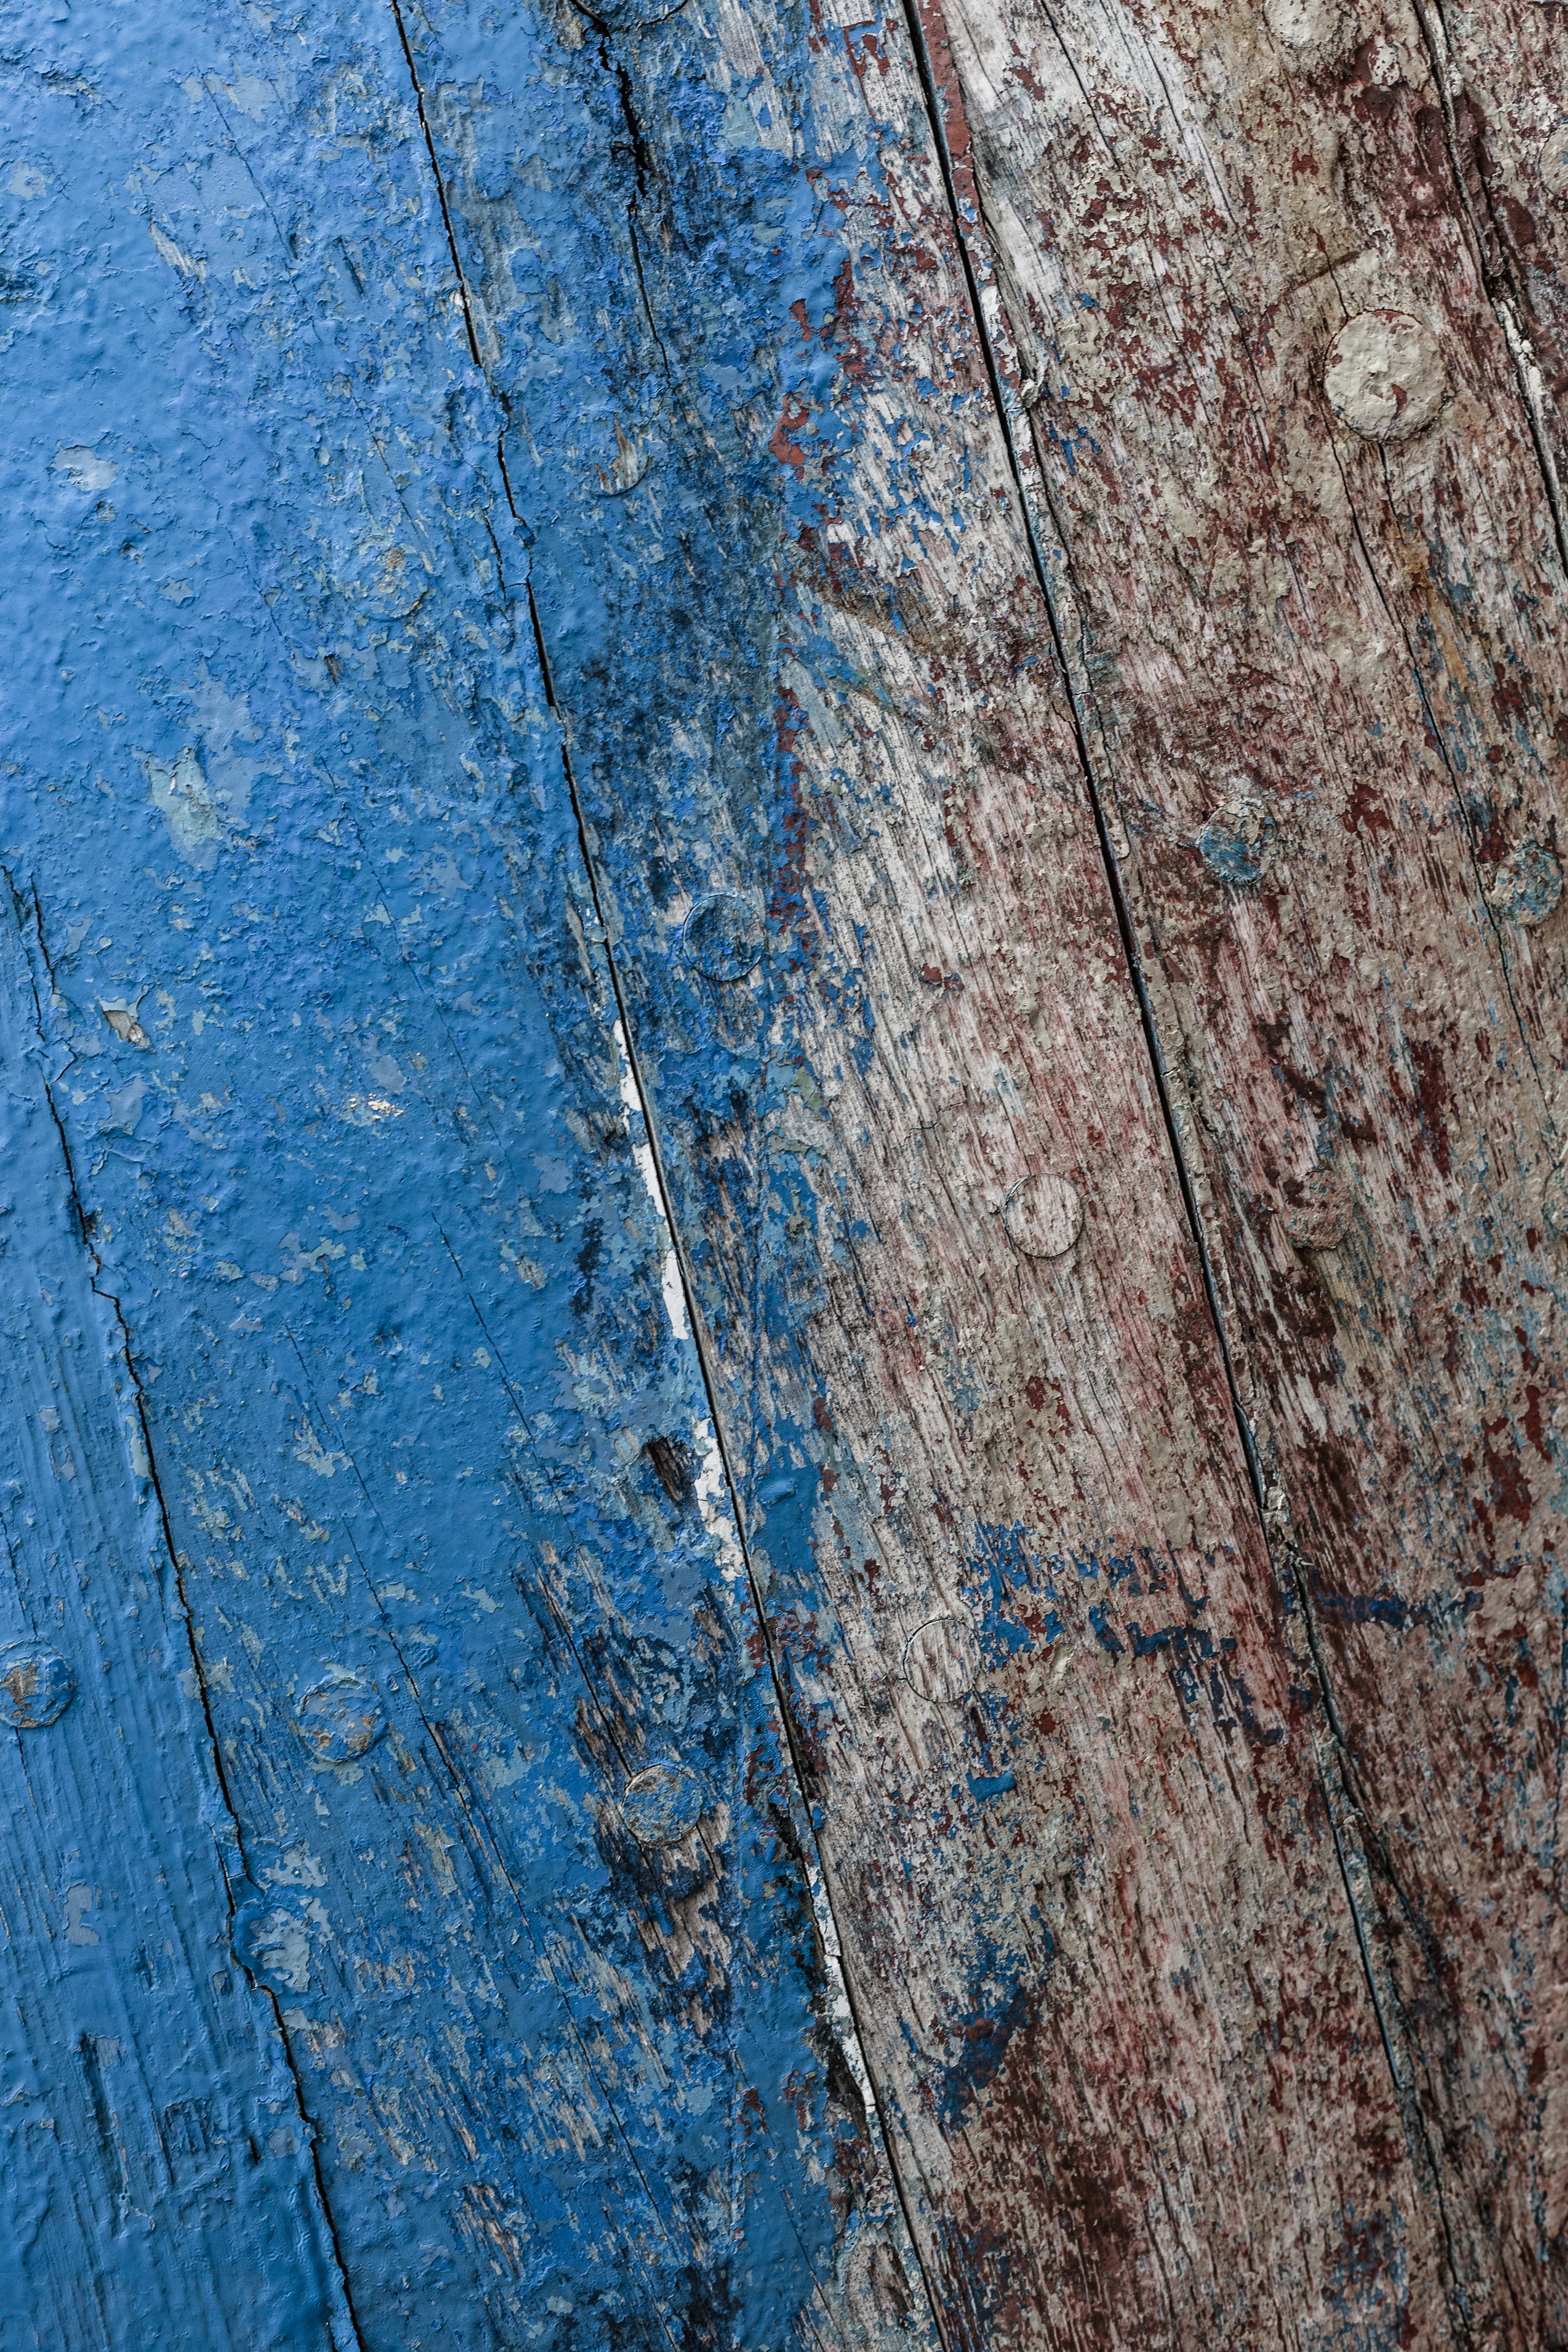 Old Blue Wood Texture, Blue, Damaged, Gritty, Grunge, HQ Photo